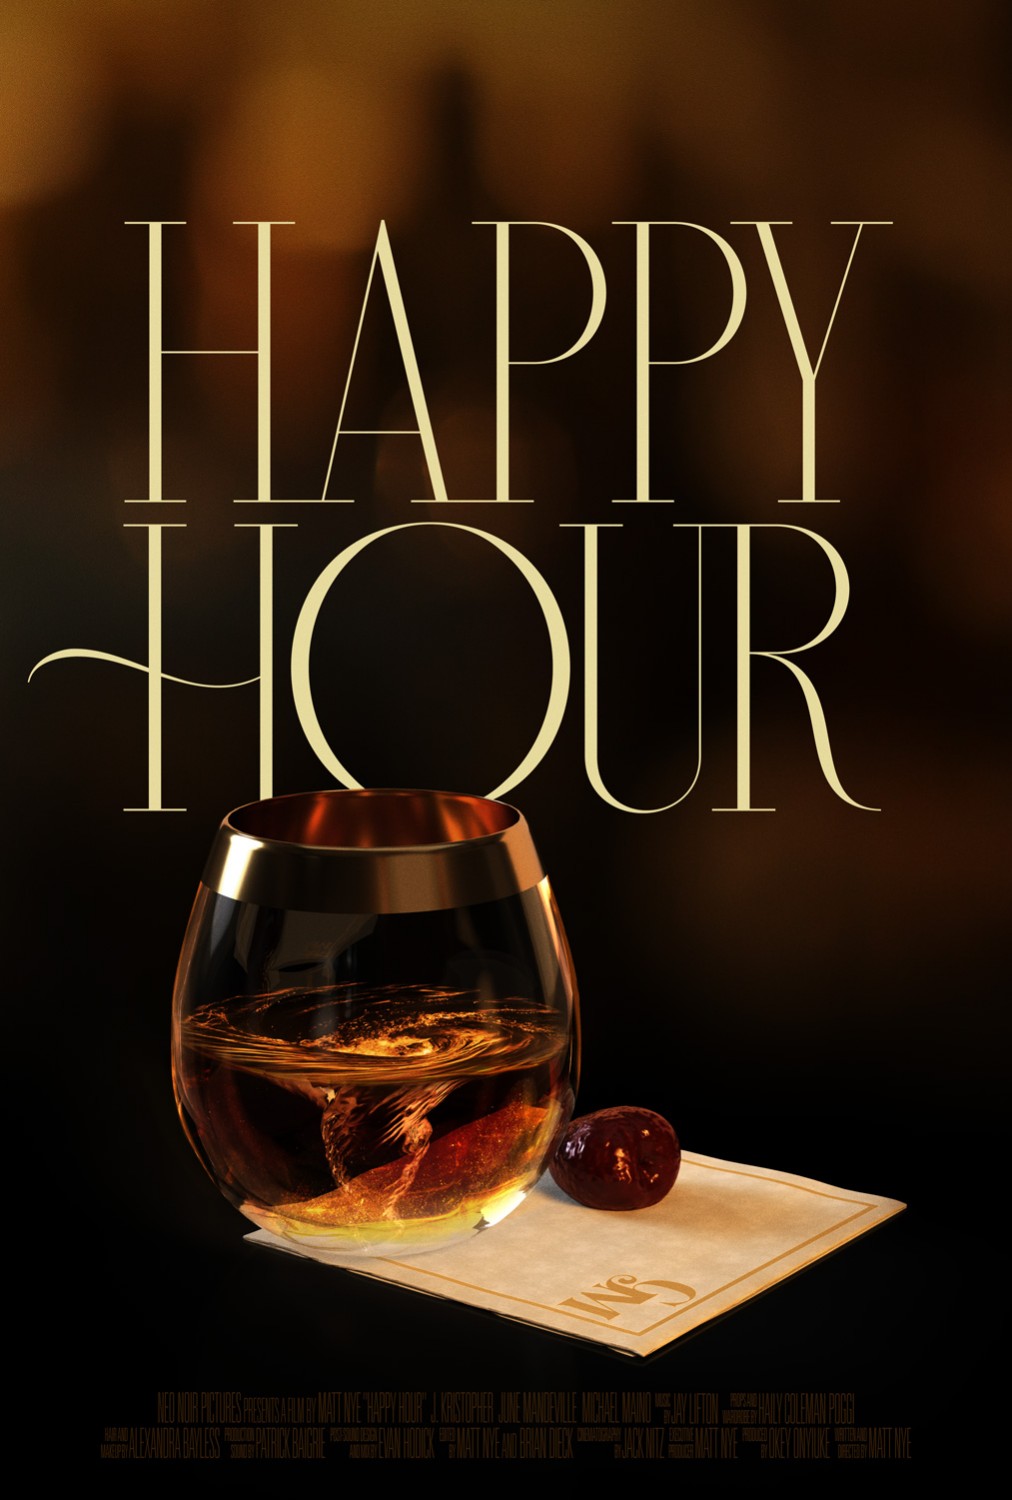 Extra Large Movie Poster Image for Happy Hour